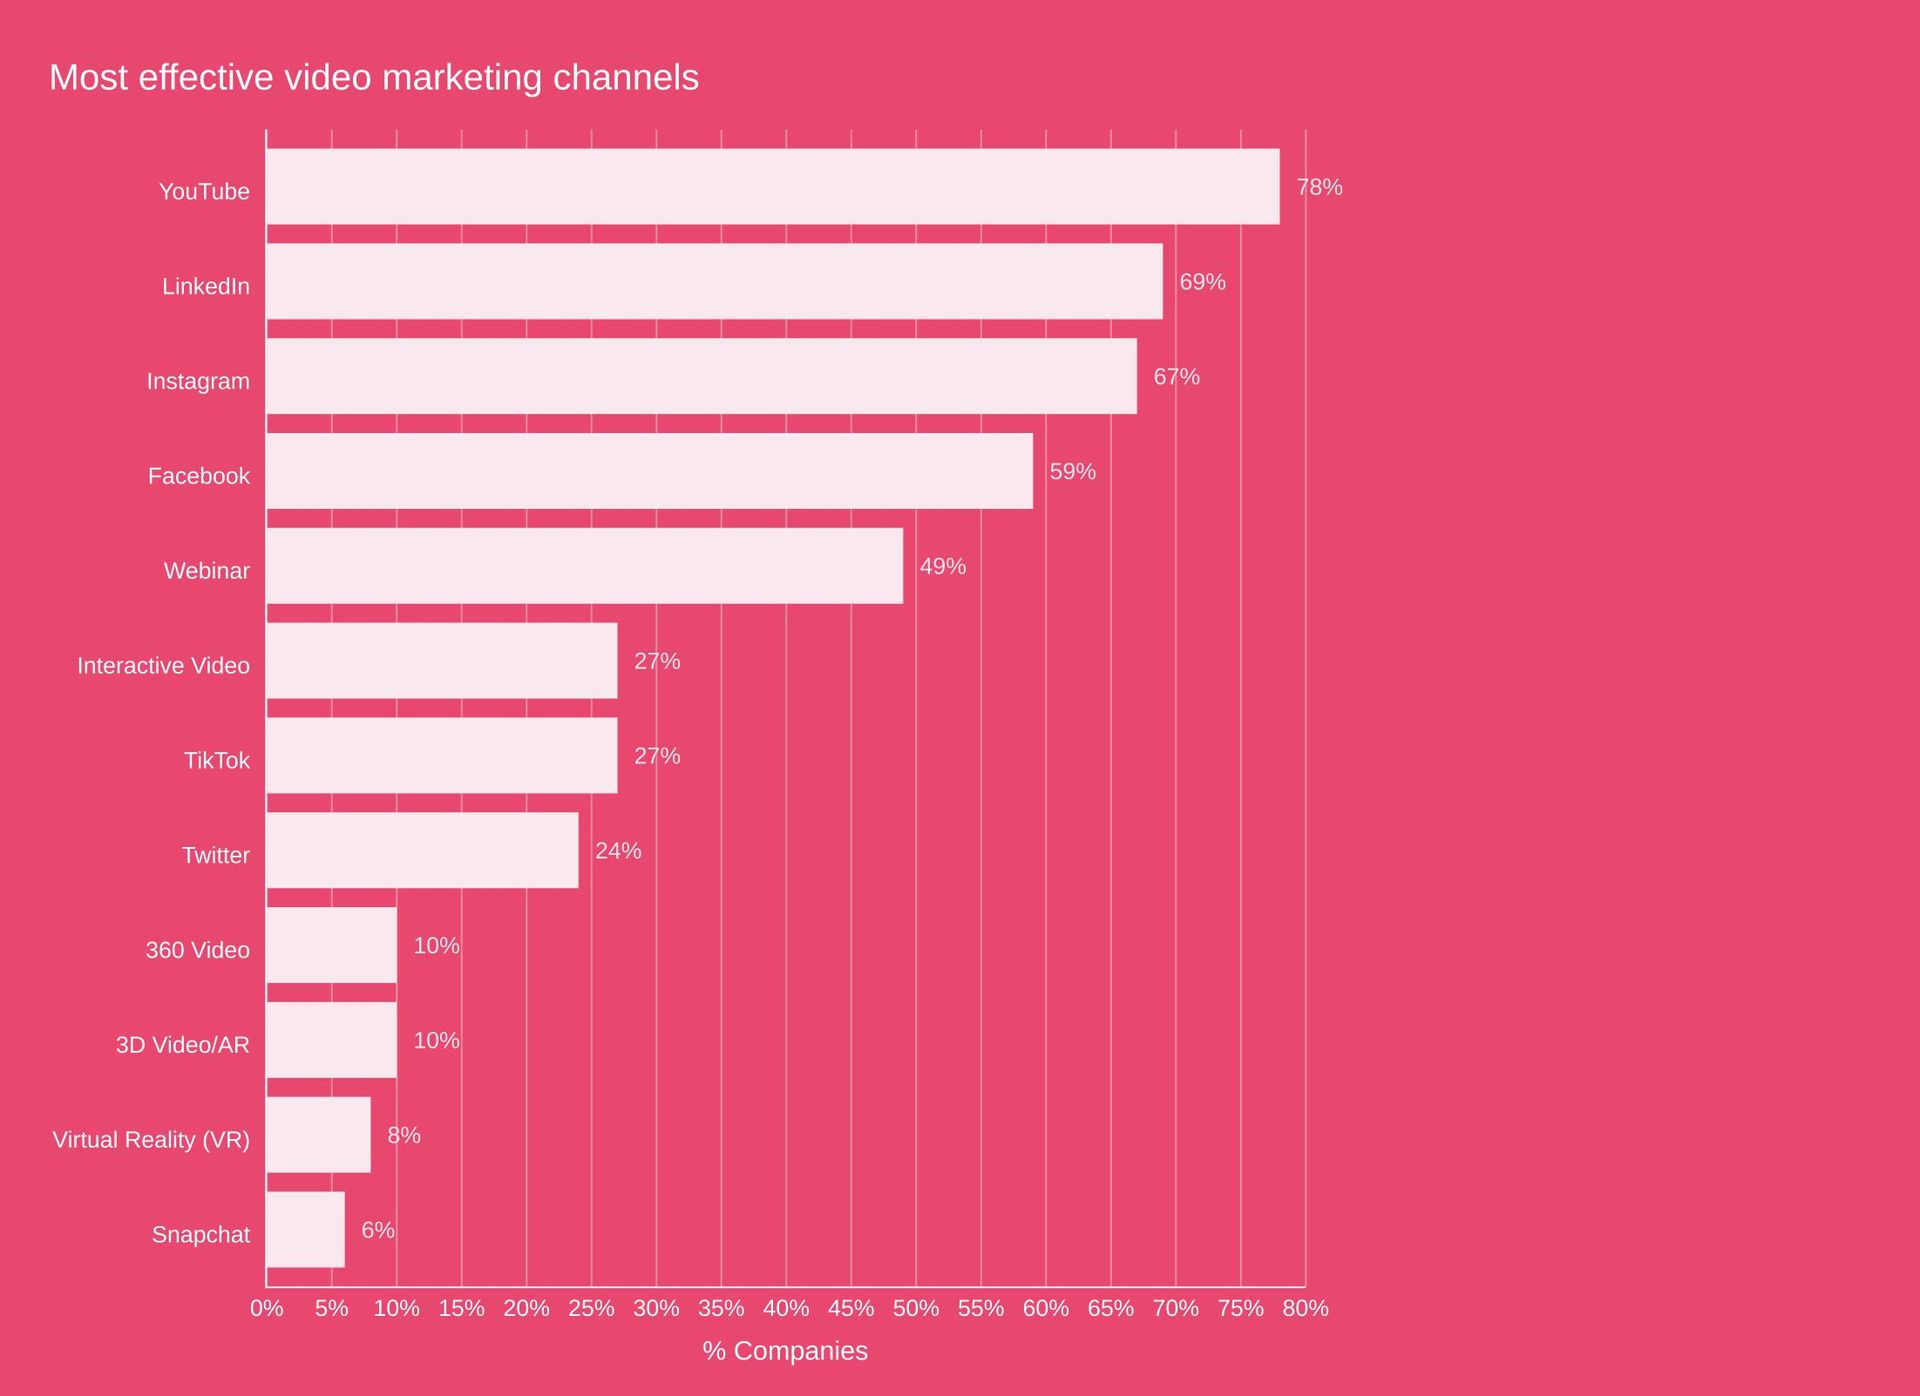 Graph showing the percentage of companies using the most effective video marketing channels